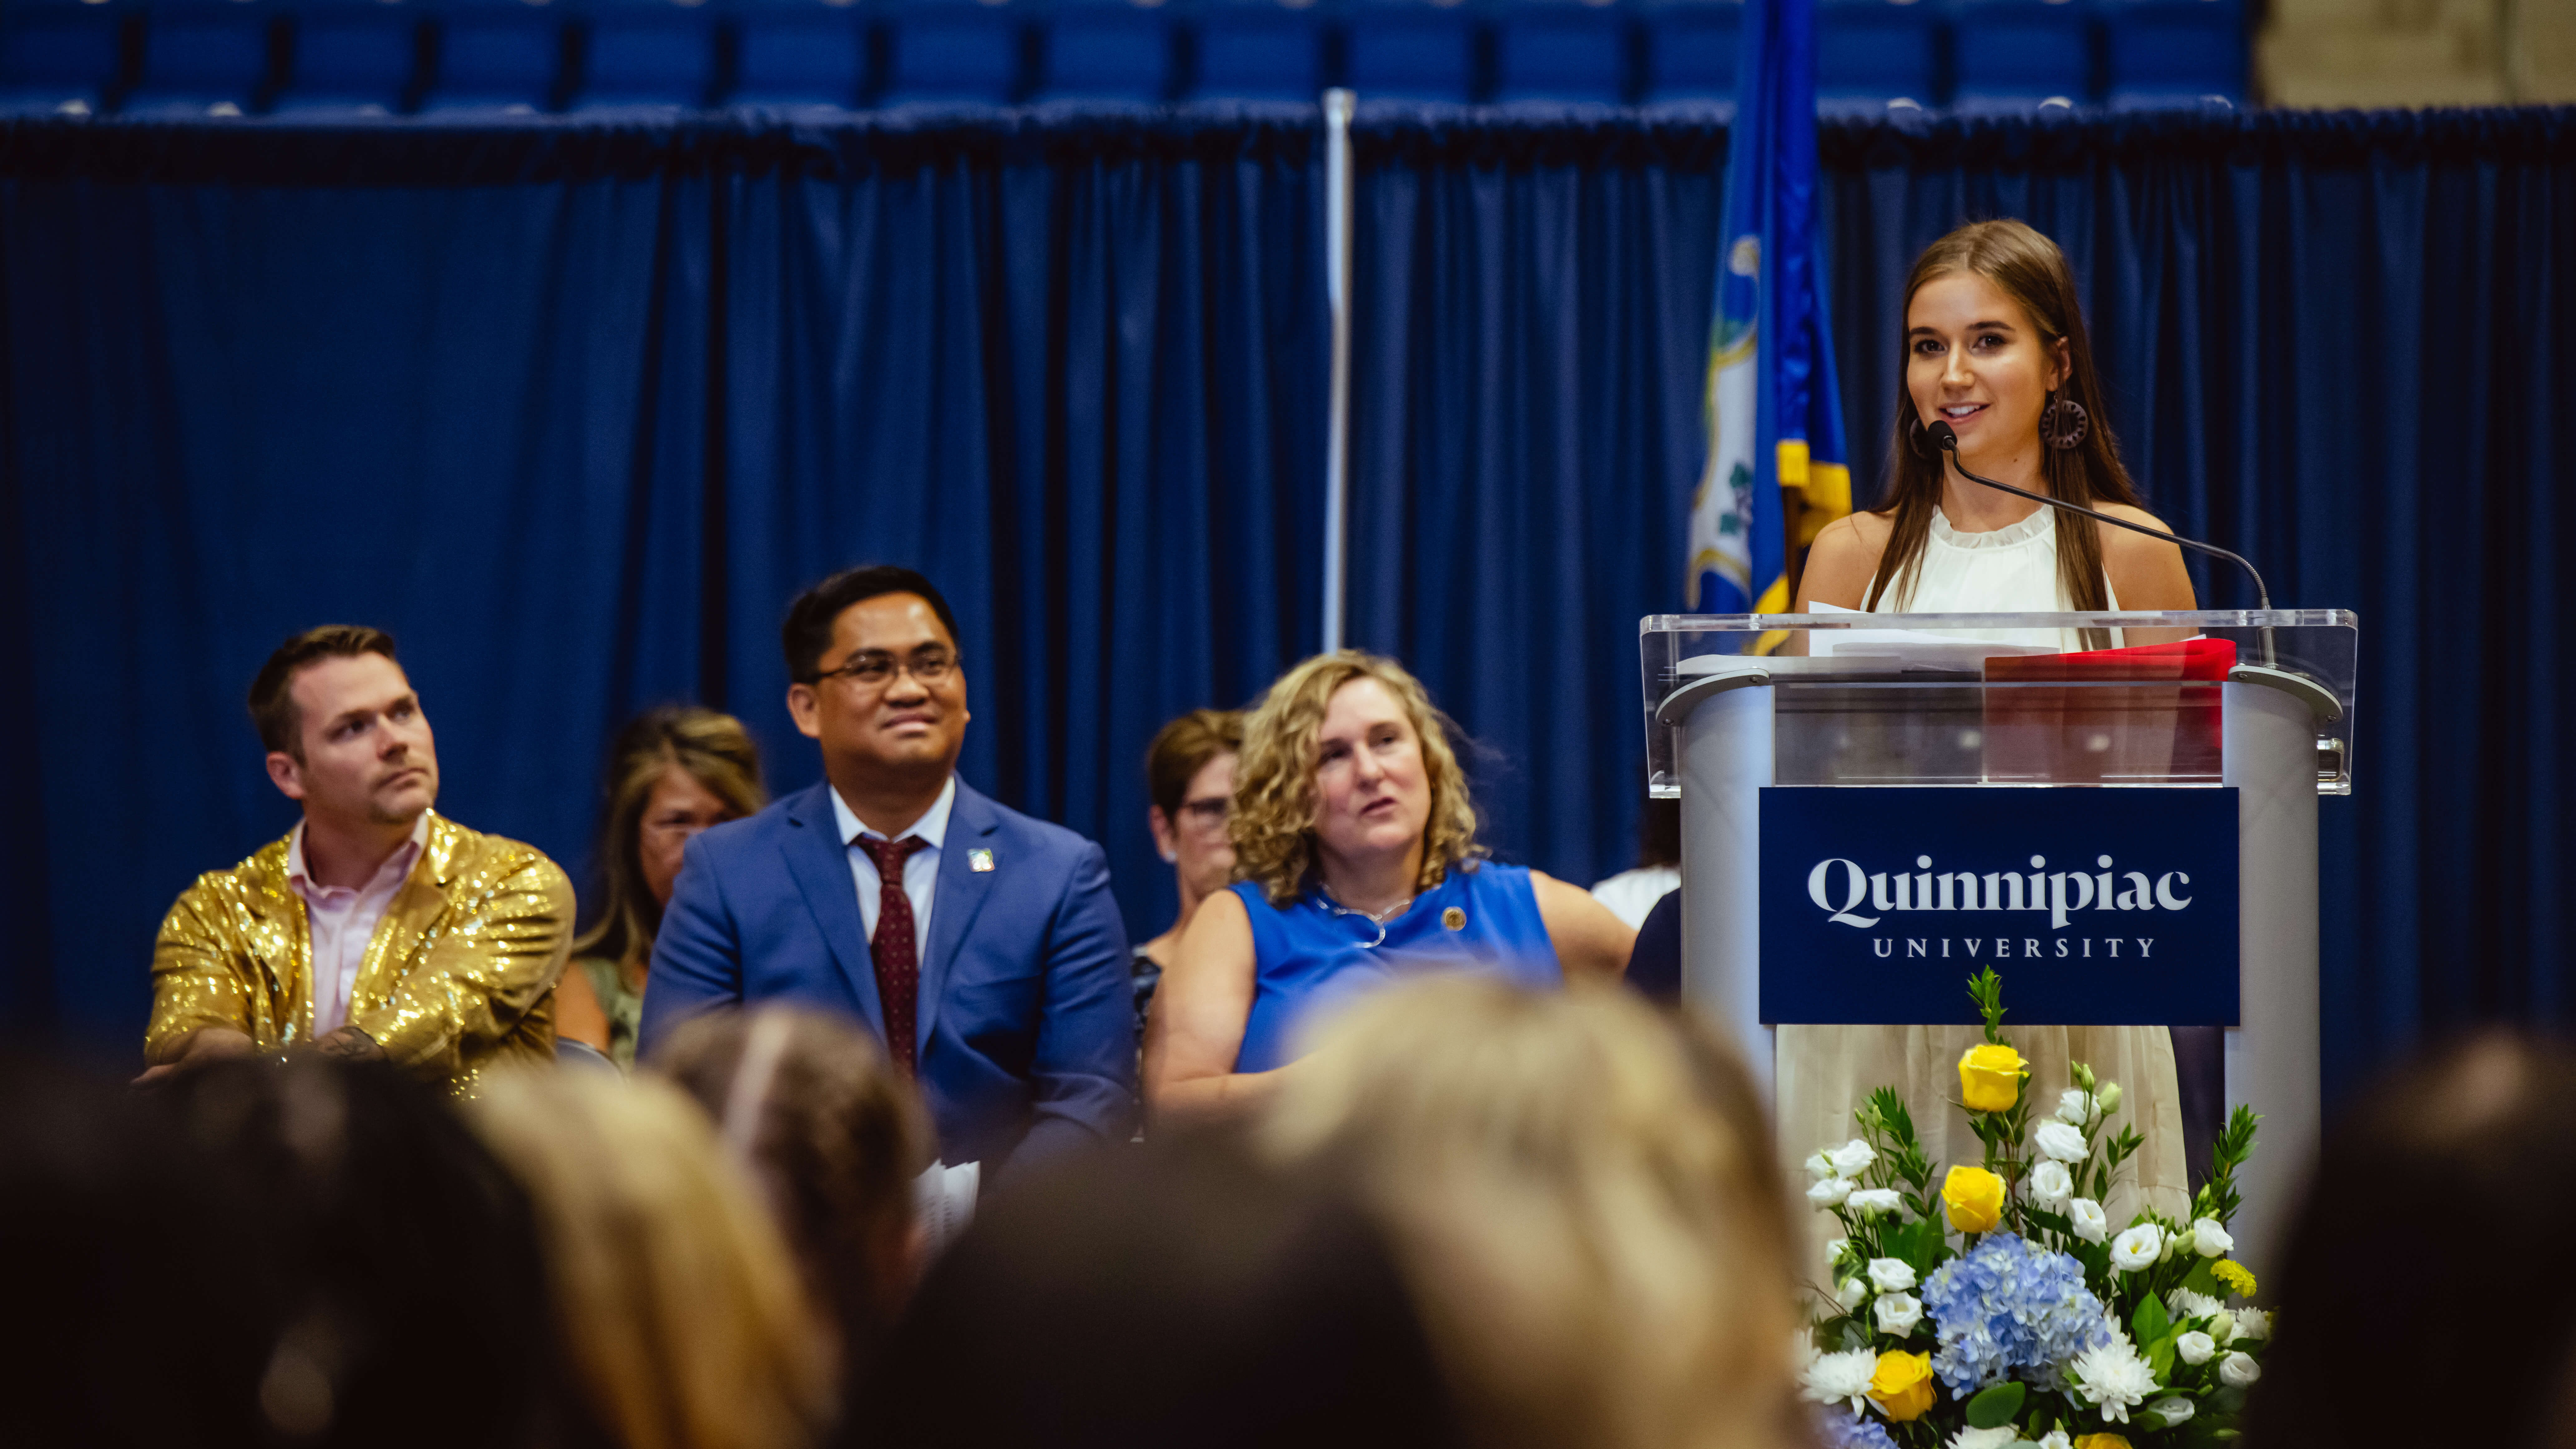 A graduate speaks on stage during the ceremony